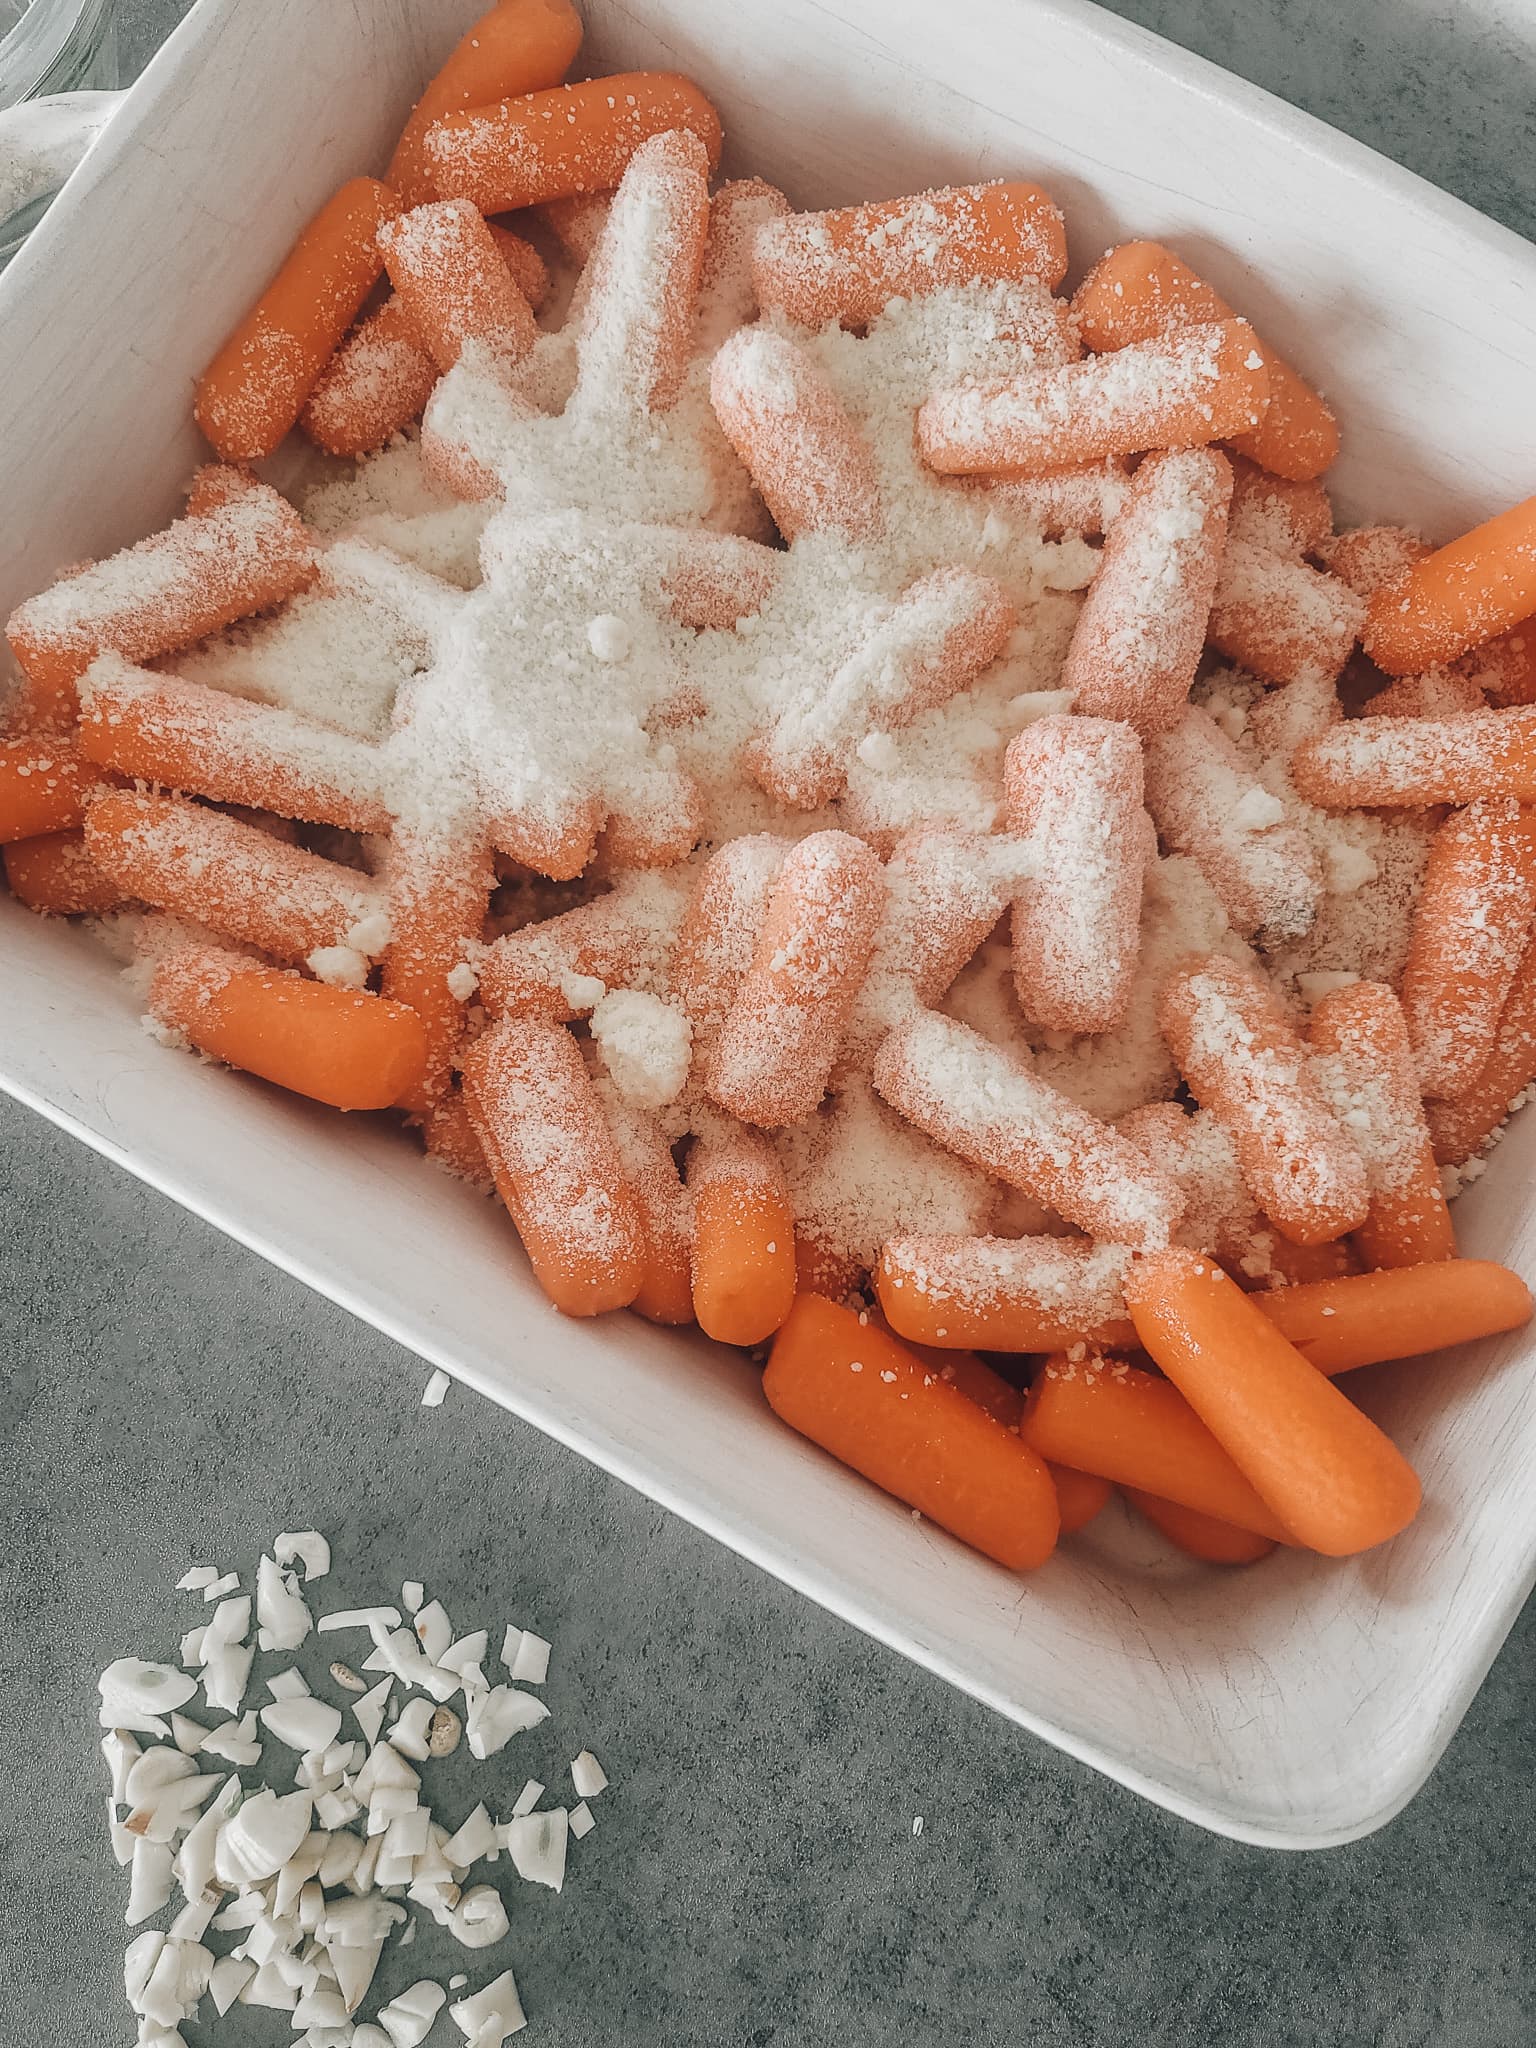 Cover equally with olive oil. Sprinkle parmesan over the top. Parmesan garlic roasted carrots